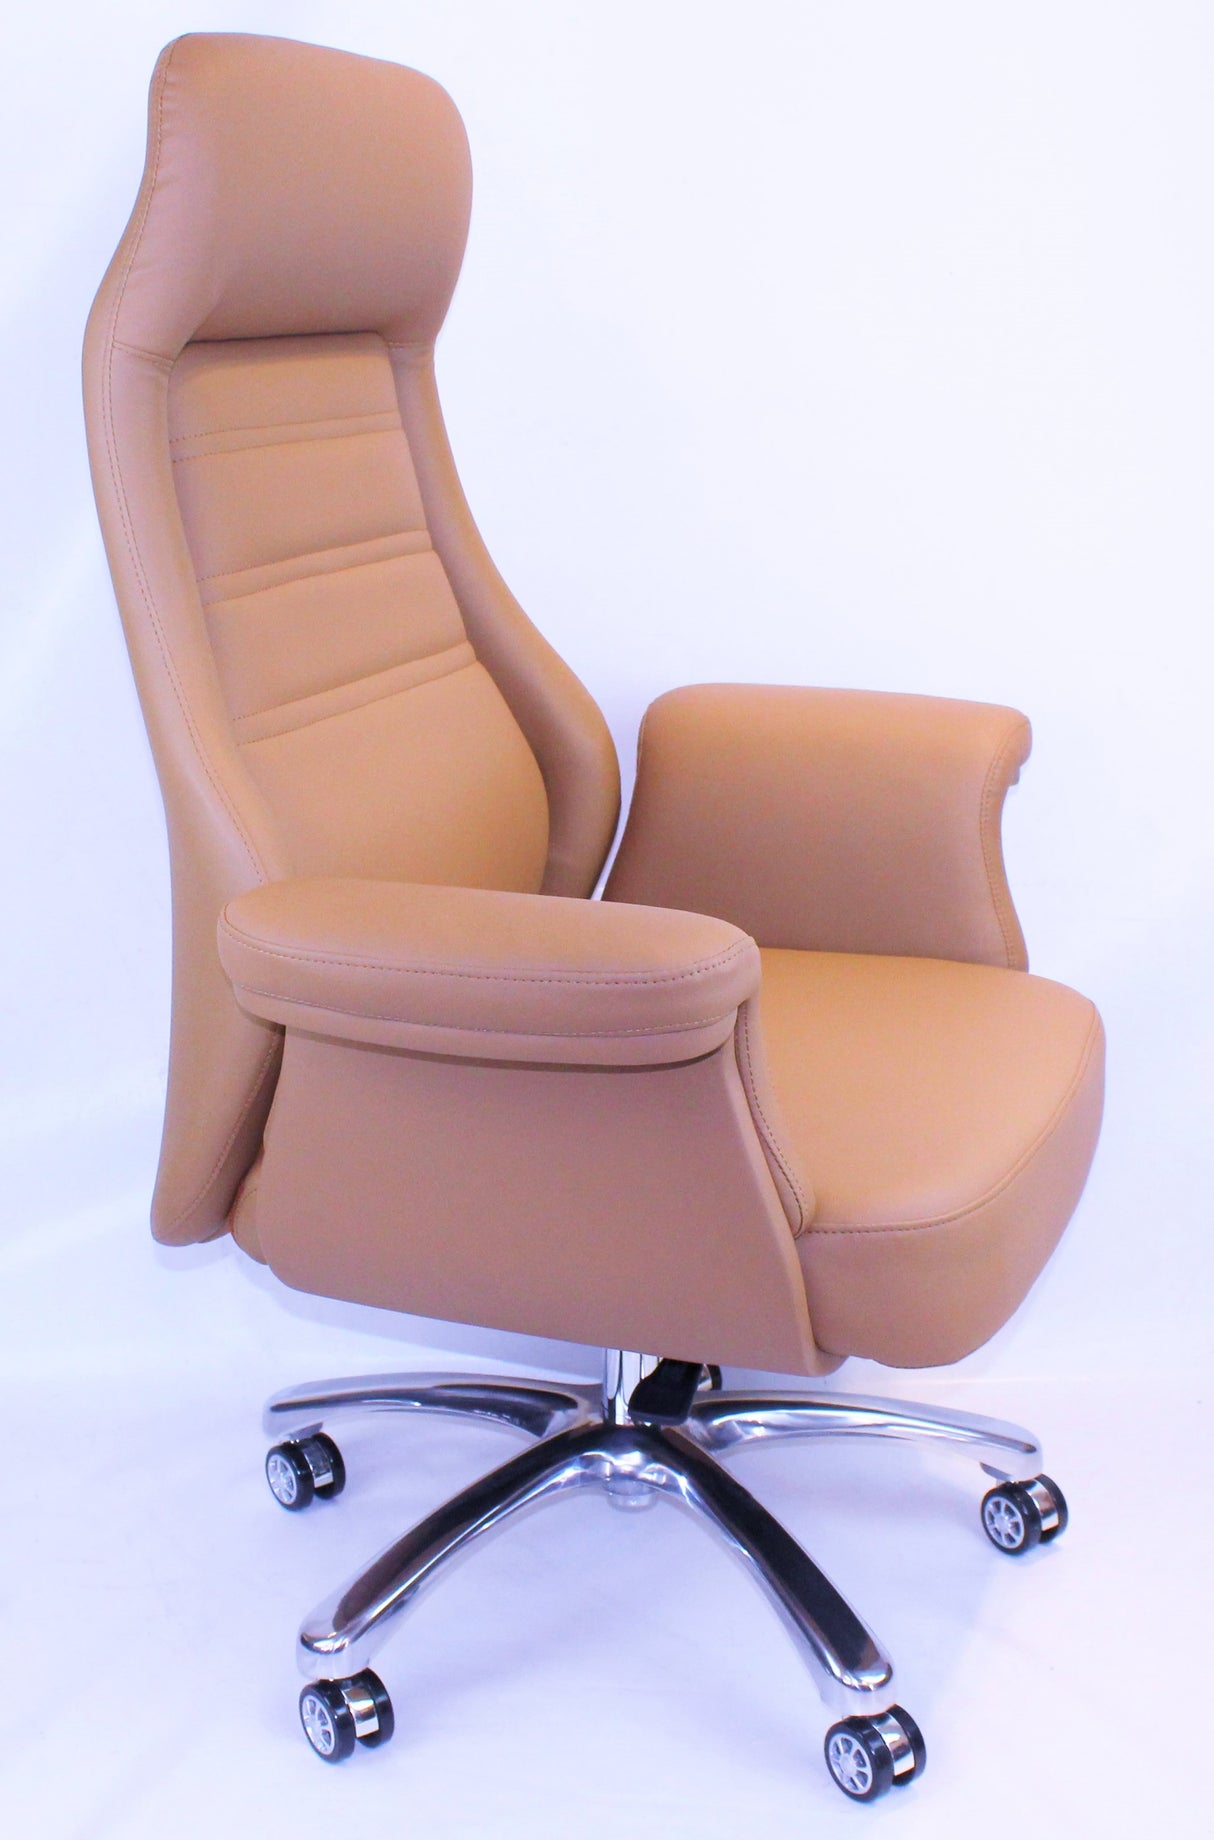 Beige Leather Executive Office Chair - DH-090